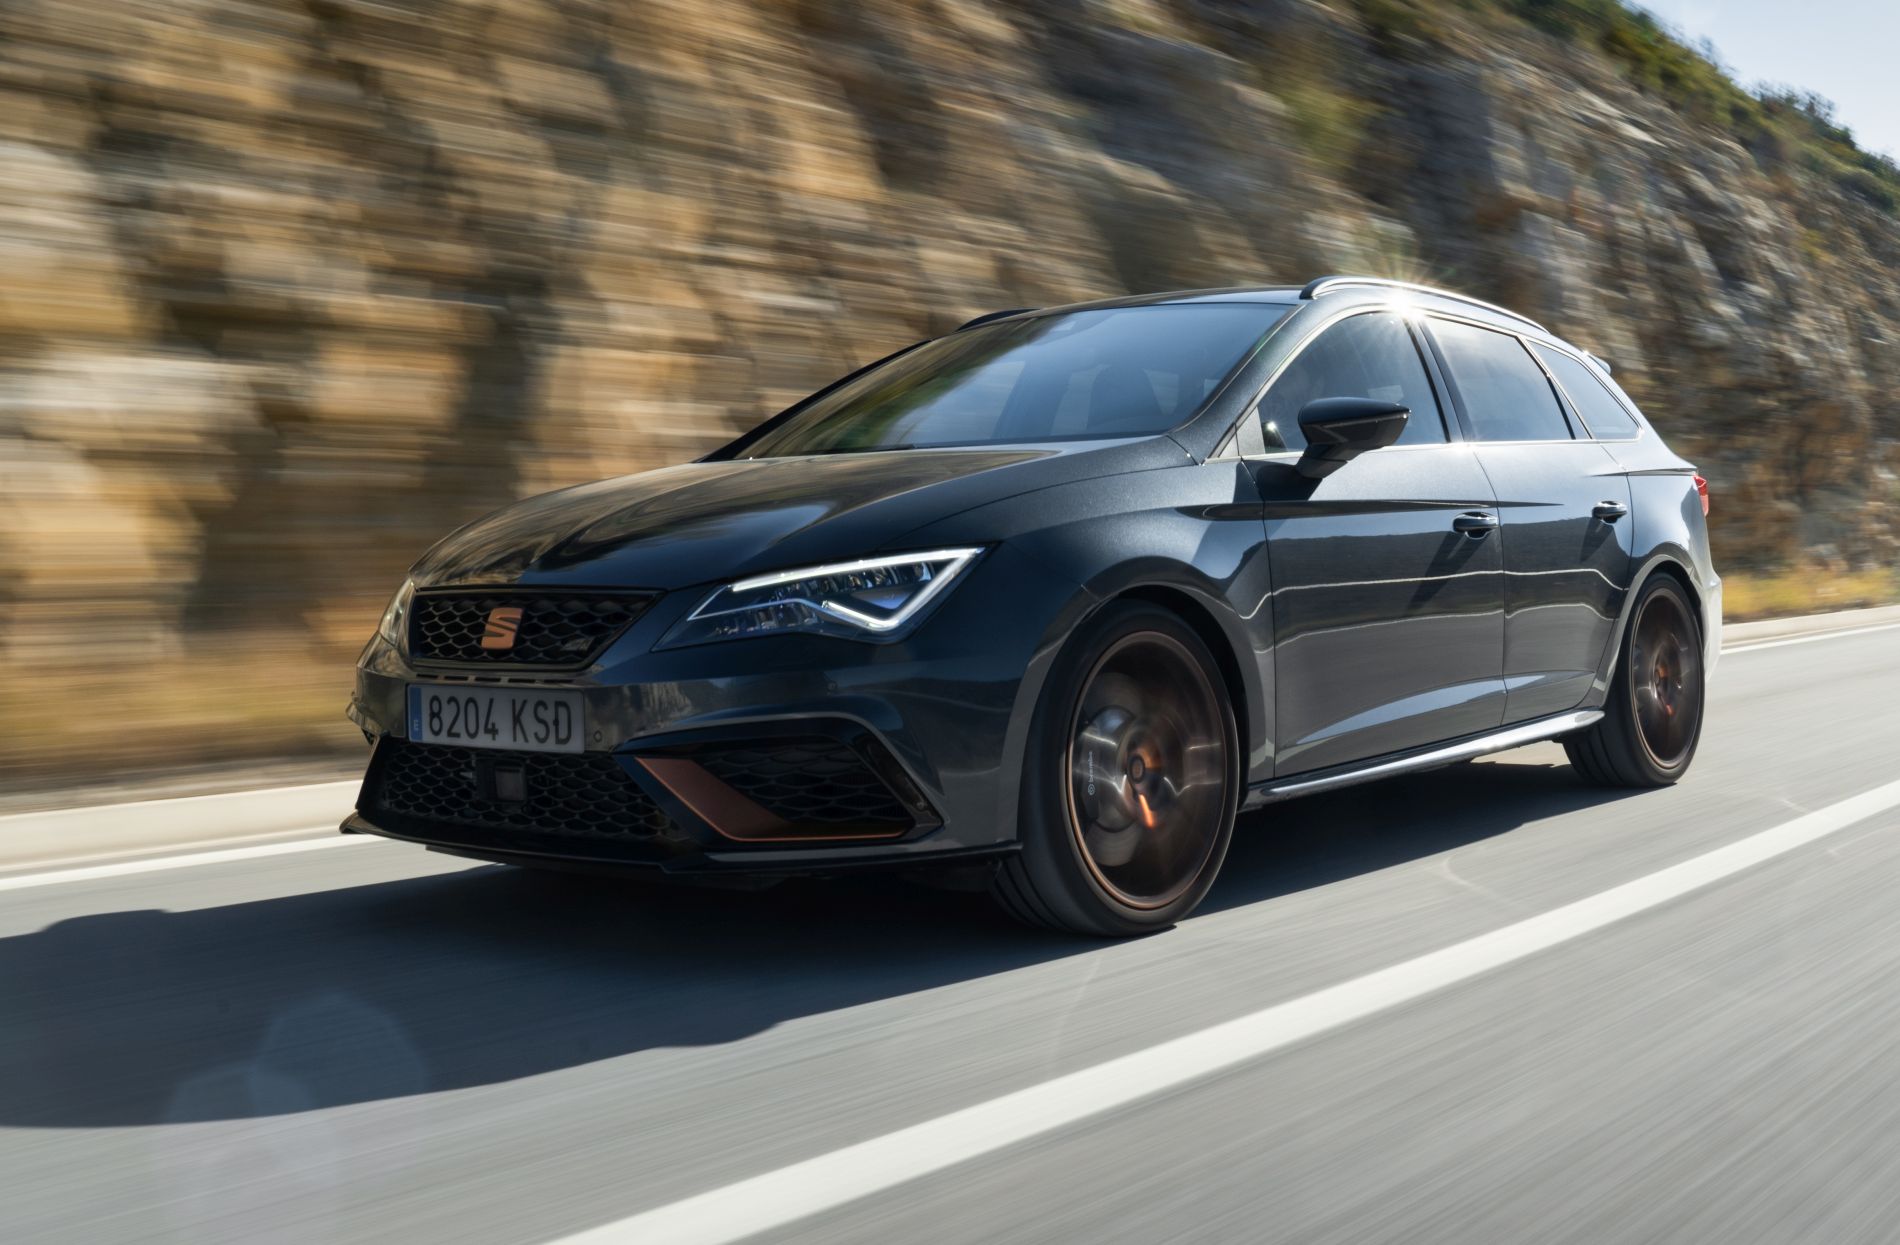 Leon-CUPRA-R-ST-brings-new-levels-of-uniqueness-sophistication-and-performance_05_HQ